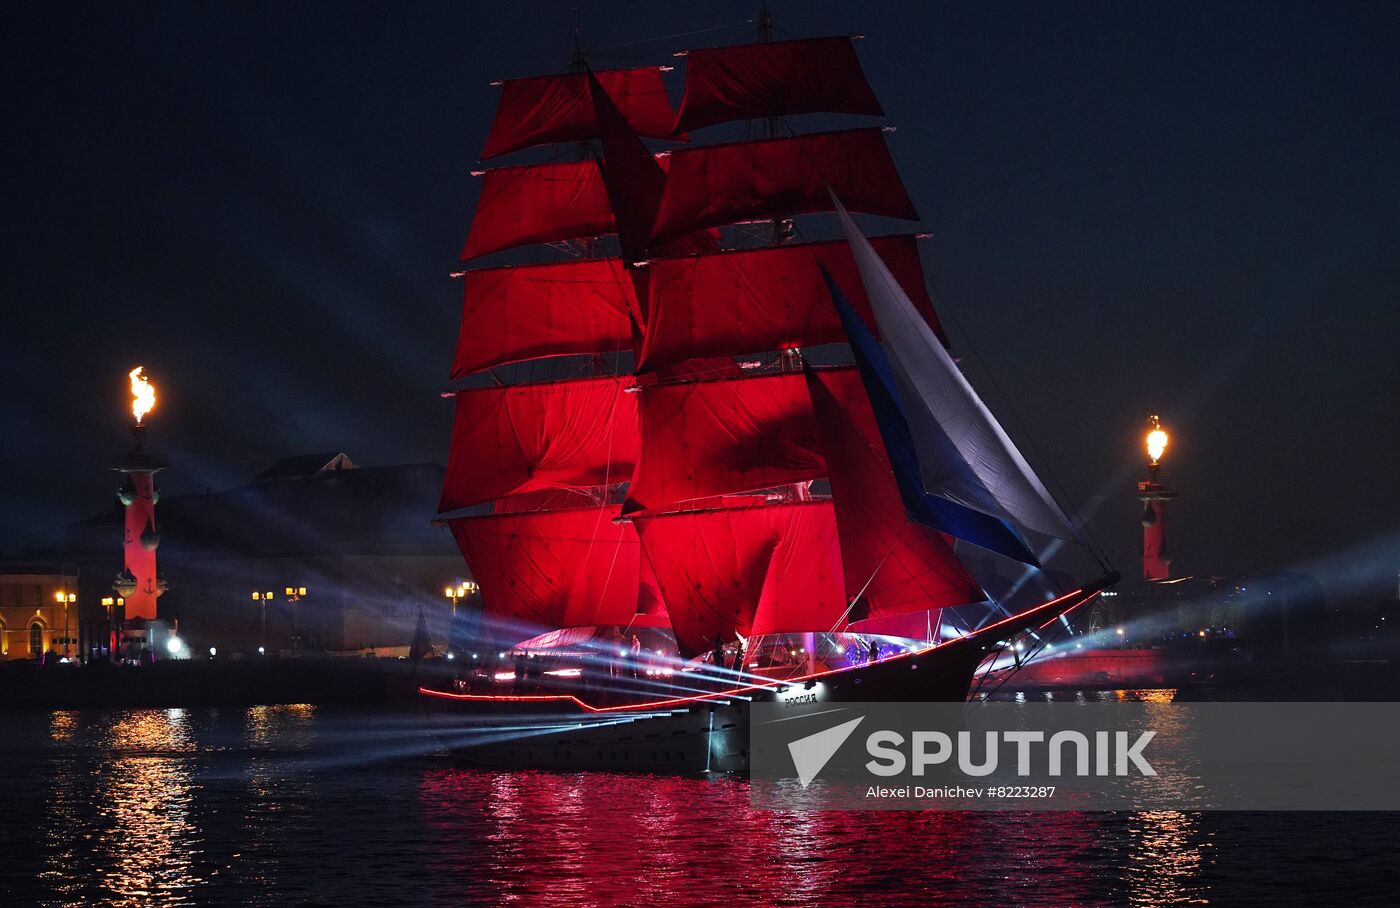 Russia Scarlet Sails Show